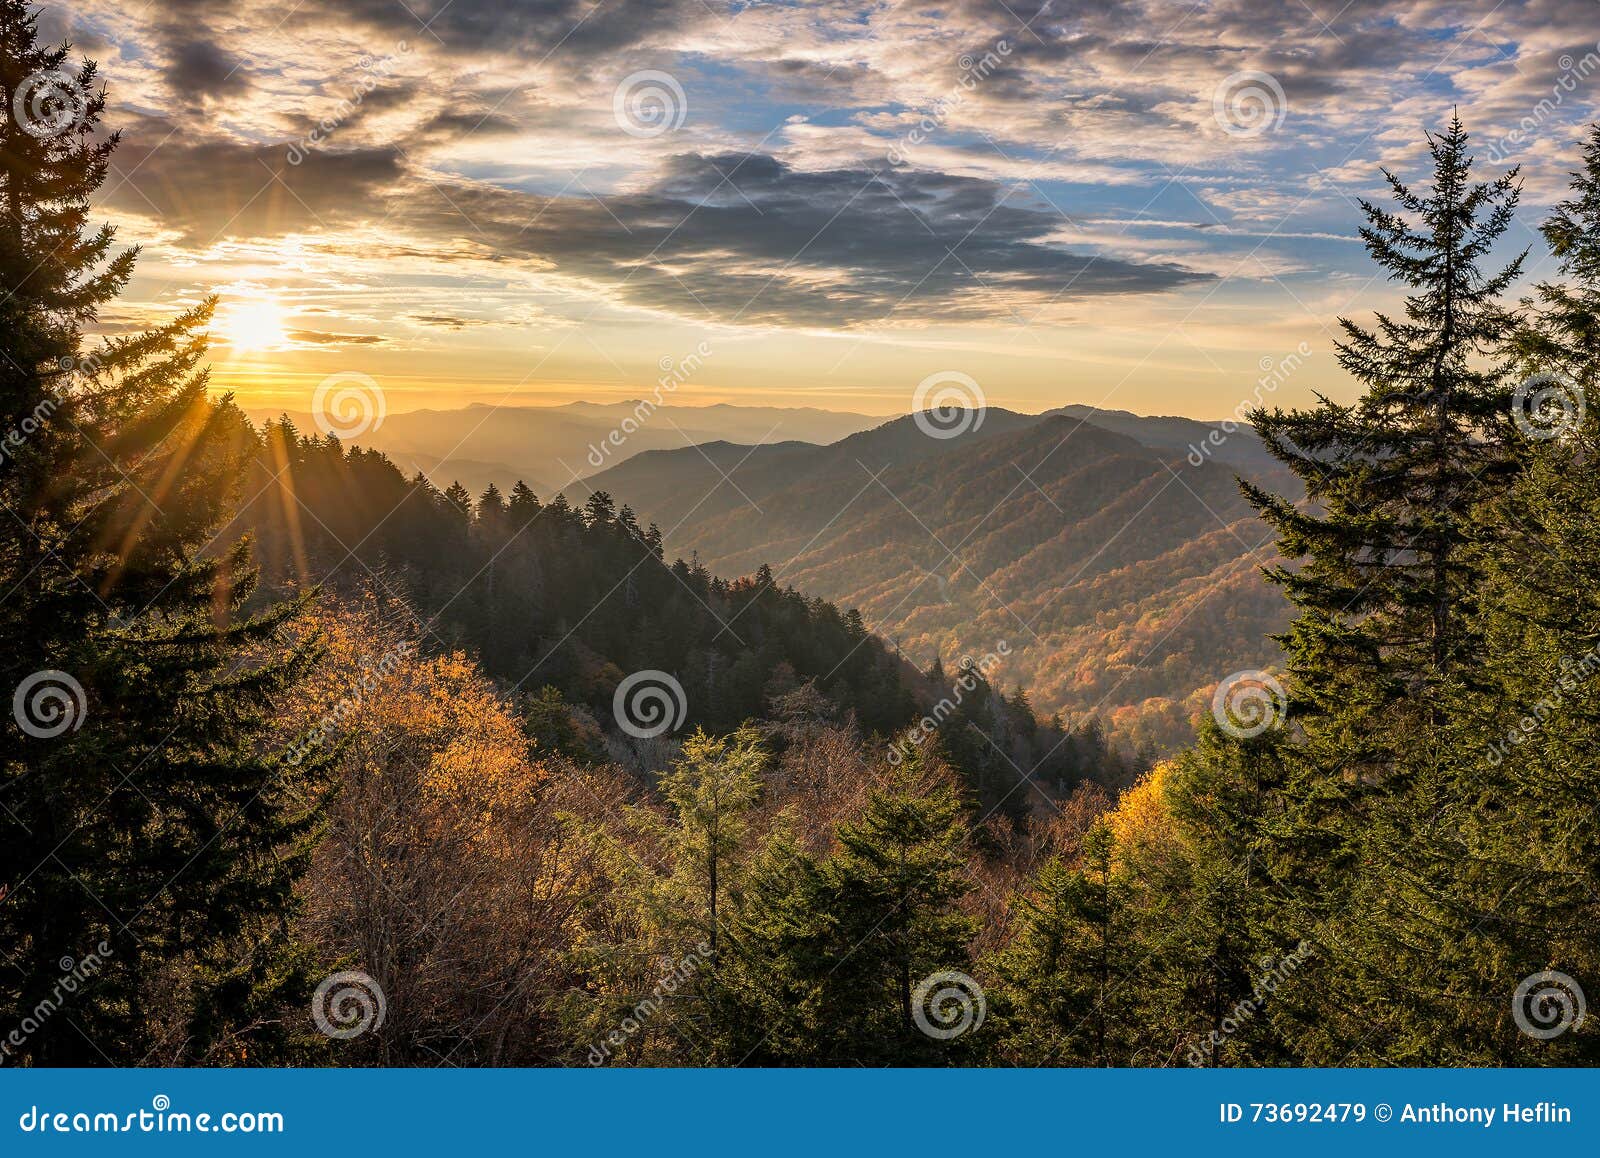 fall colors, scenic sunrise, great smoky mountains